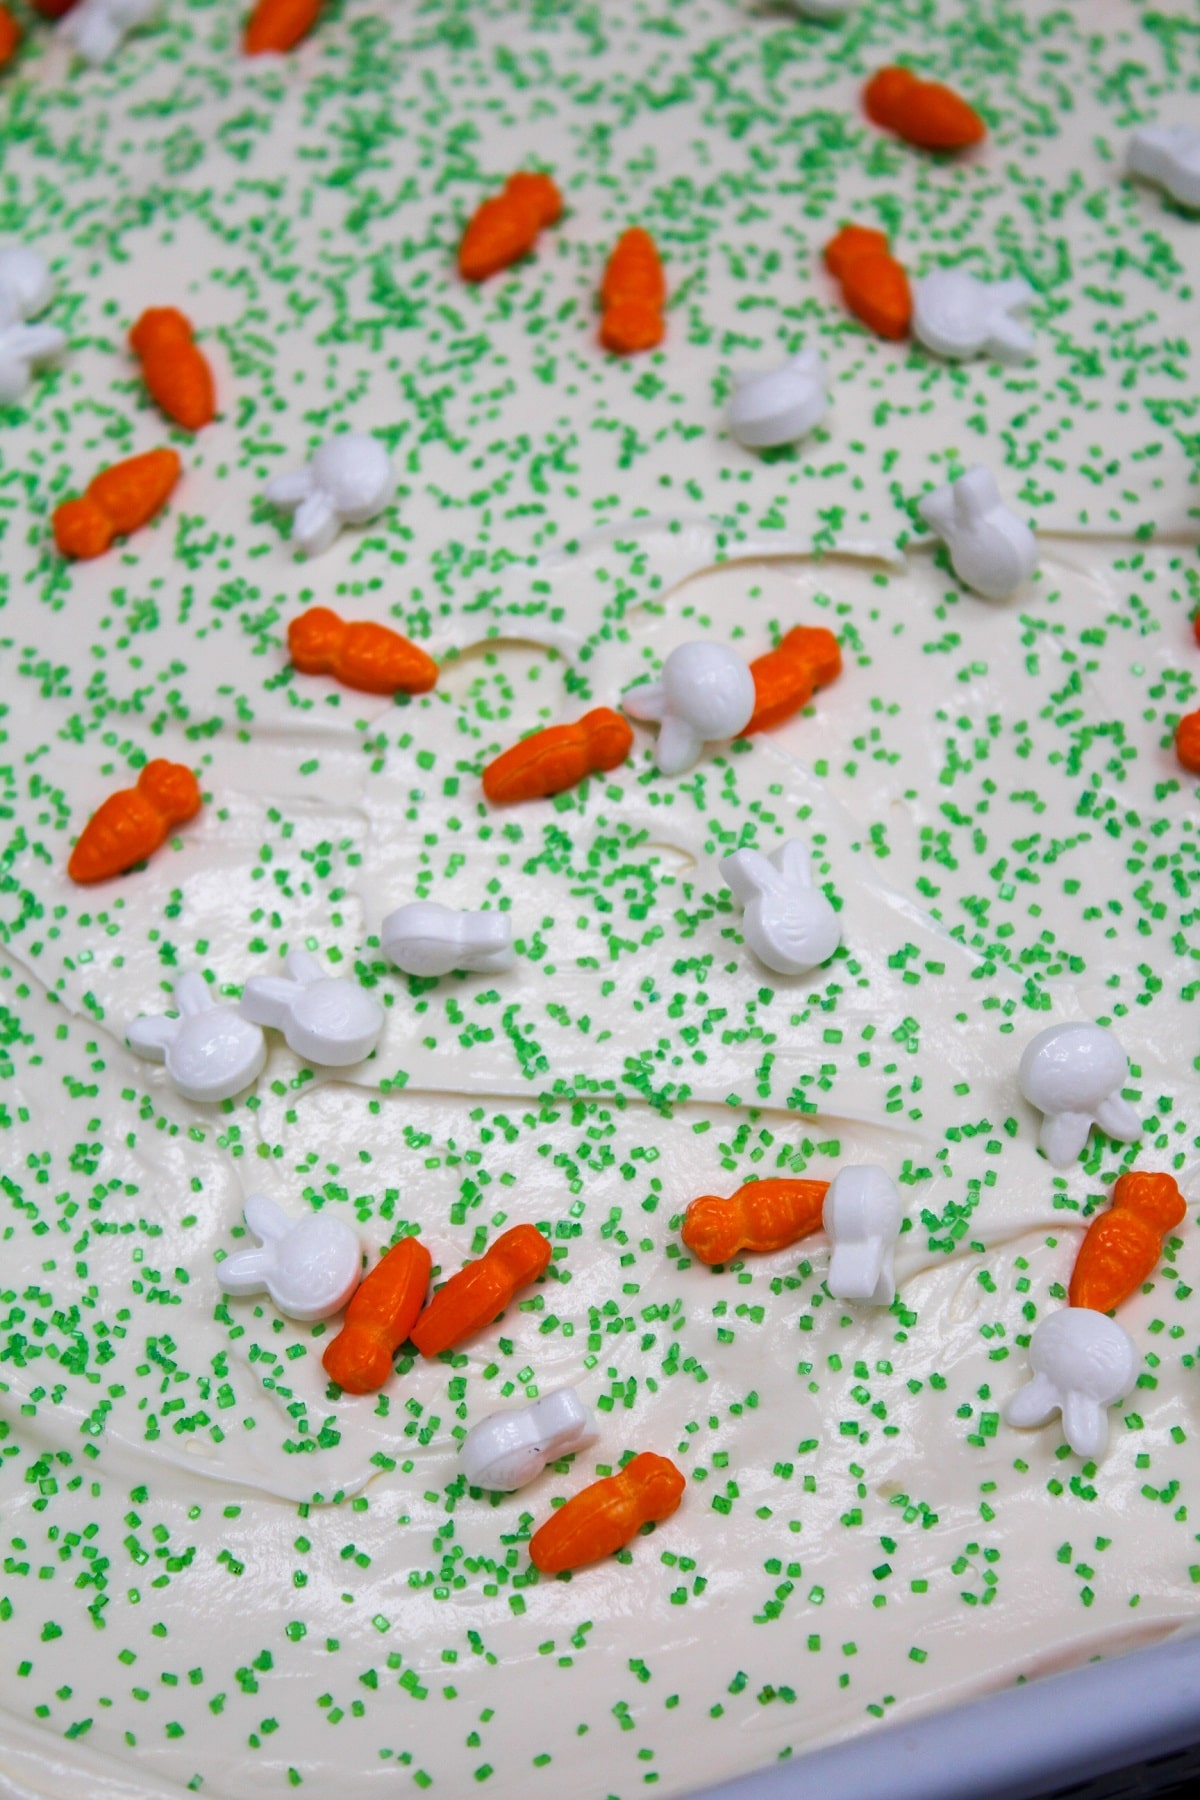 photo of carrot and bunny shaped sprinkles